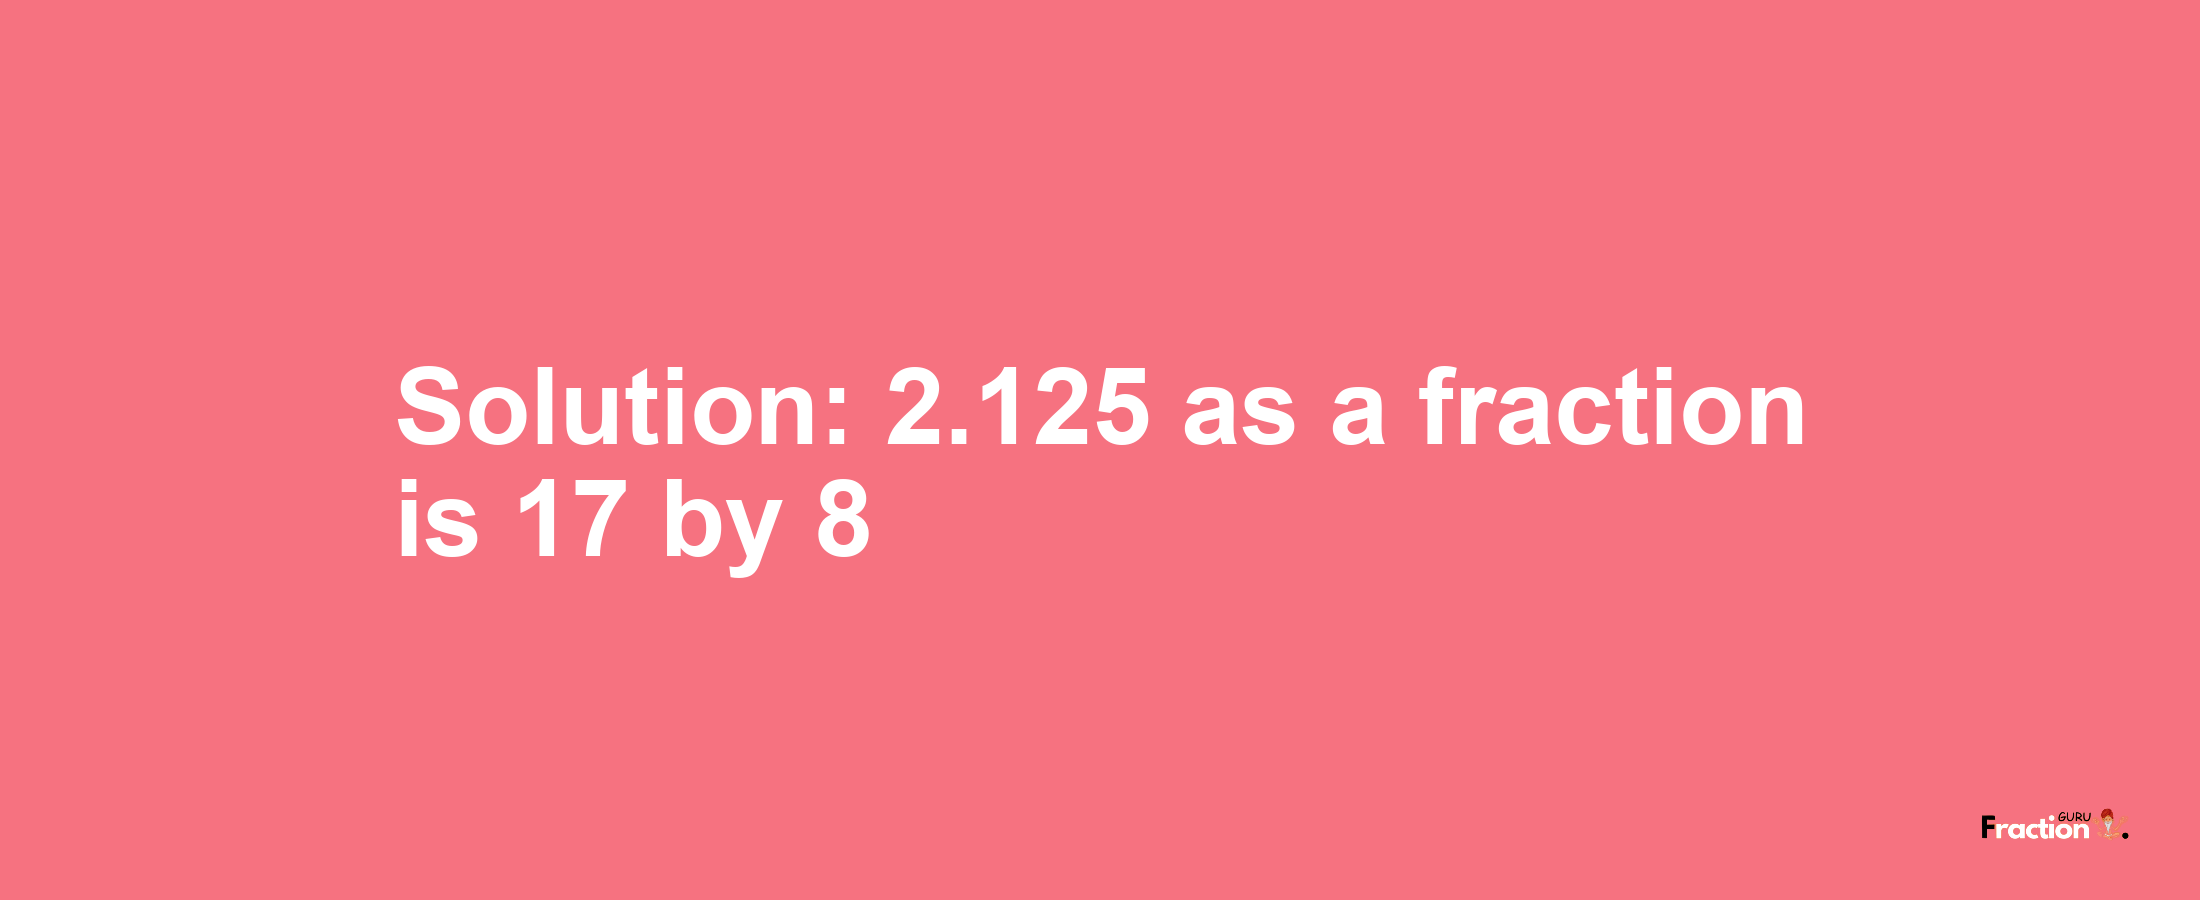 Solution:2.125 as a fraction is 17/8